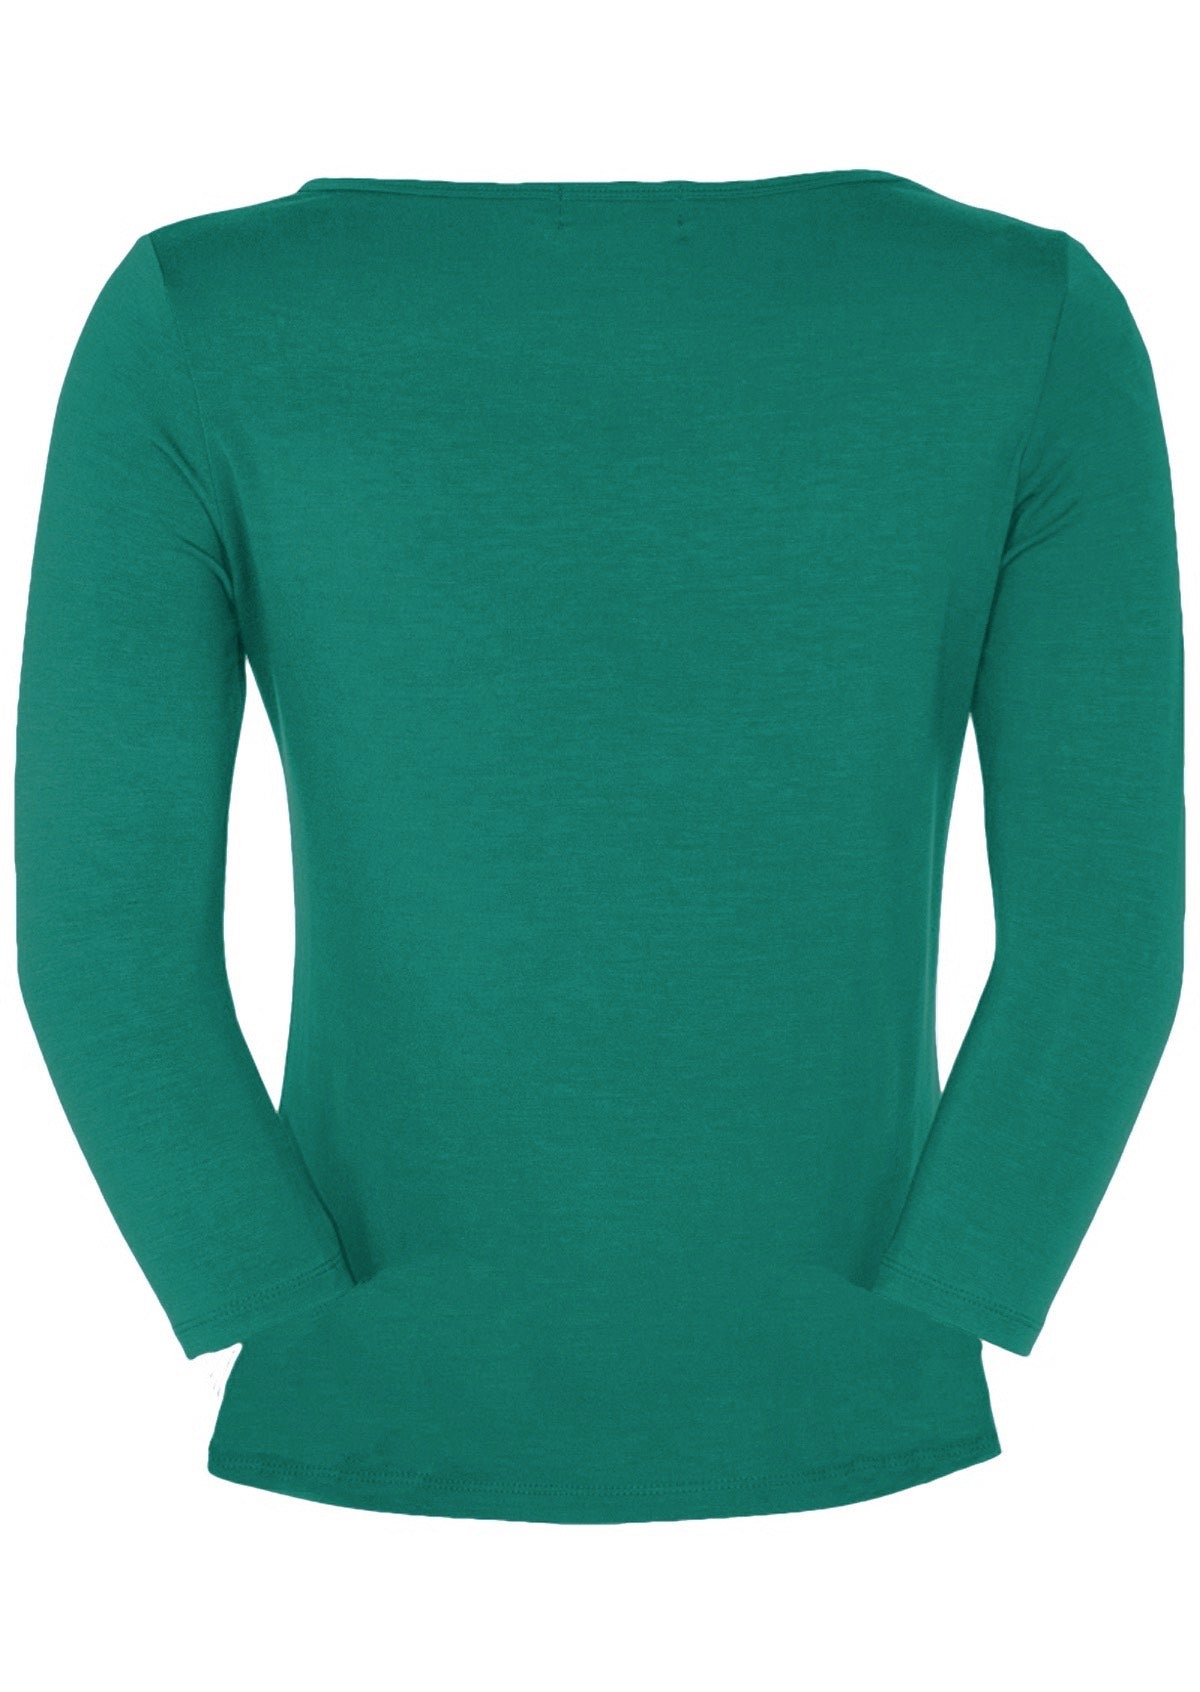 Back view of women's rayon boat neck green 3/4 sleeve top.